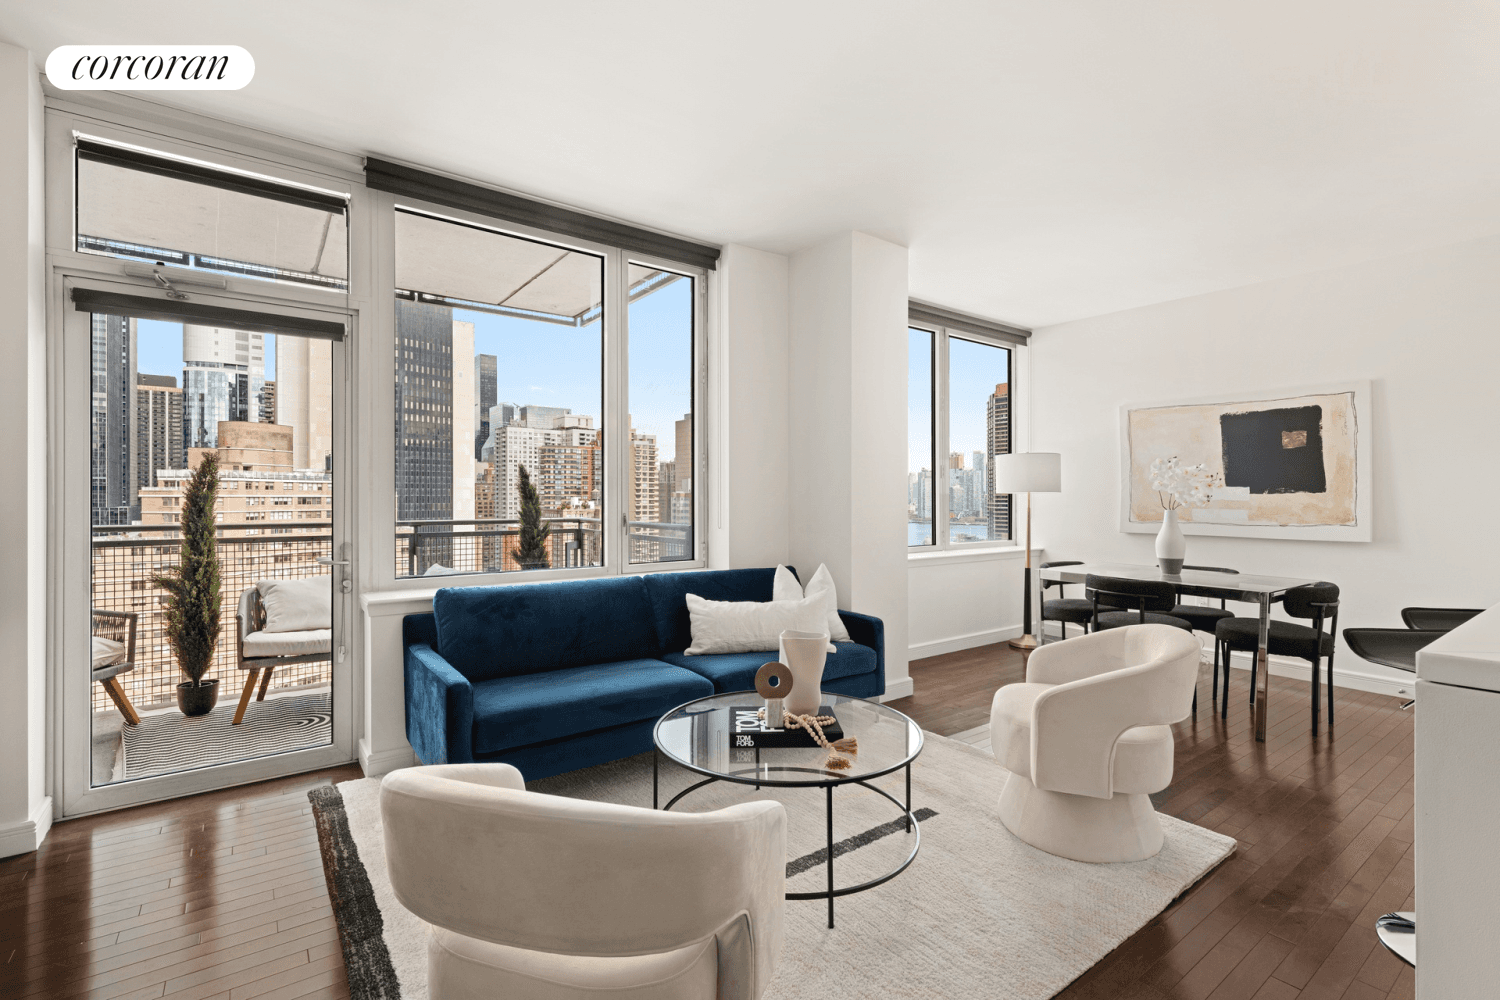 Discover luxury living at its finest in this exquisite residence located at 225 East 34th Street, Apartment 20I.